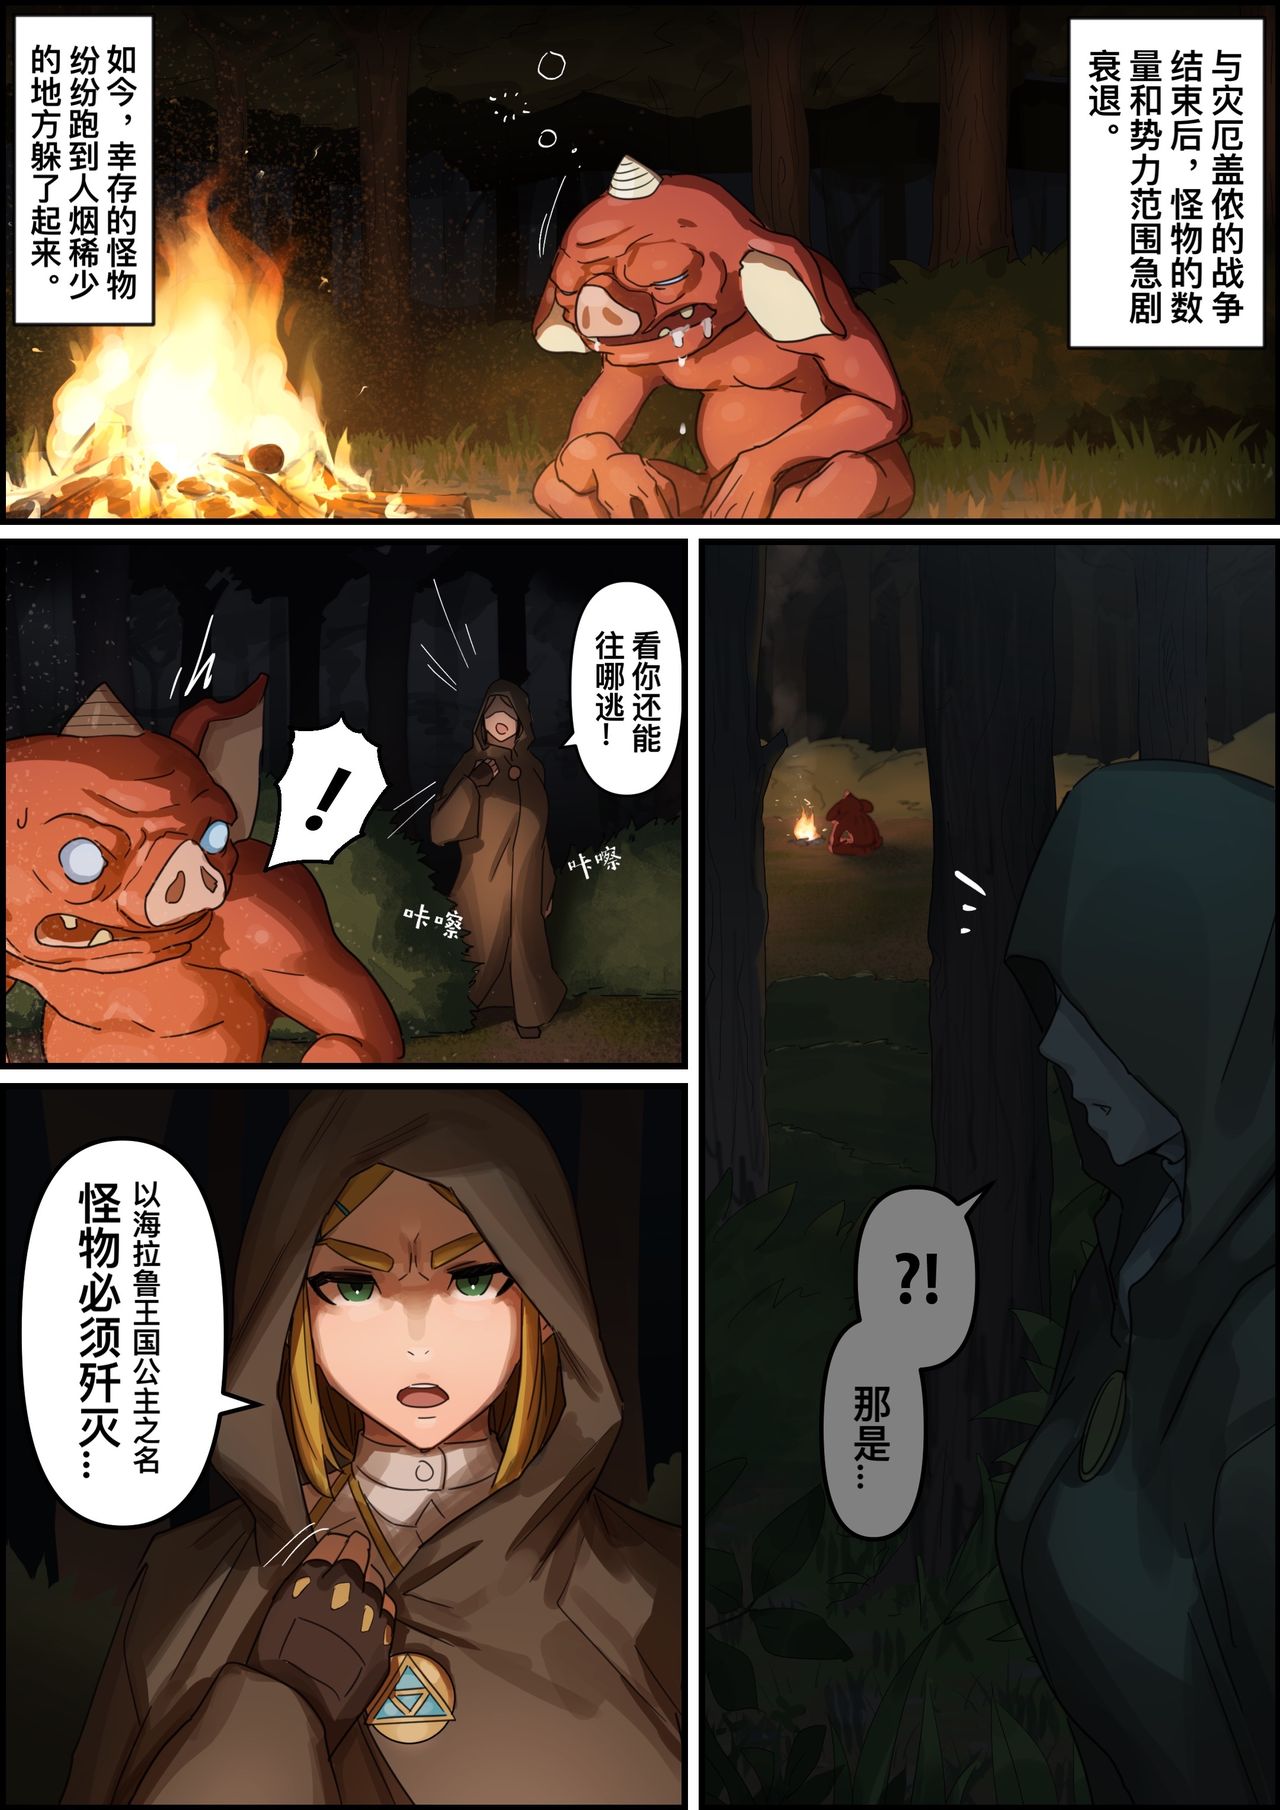 [Kunaboto]塞尔达传说:旷野之息-海拉鲁王族的复兴(ongoing)[kuroi个人汉化] [Kunaboto]Zelda BOTW - Revival of the Hyrule royal family1~5[chinese]